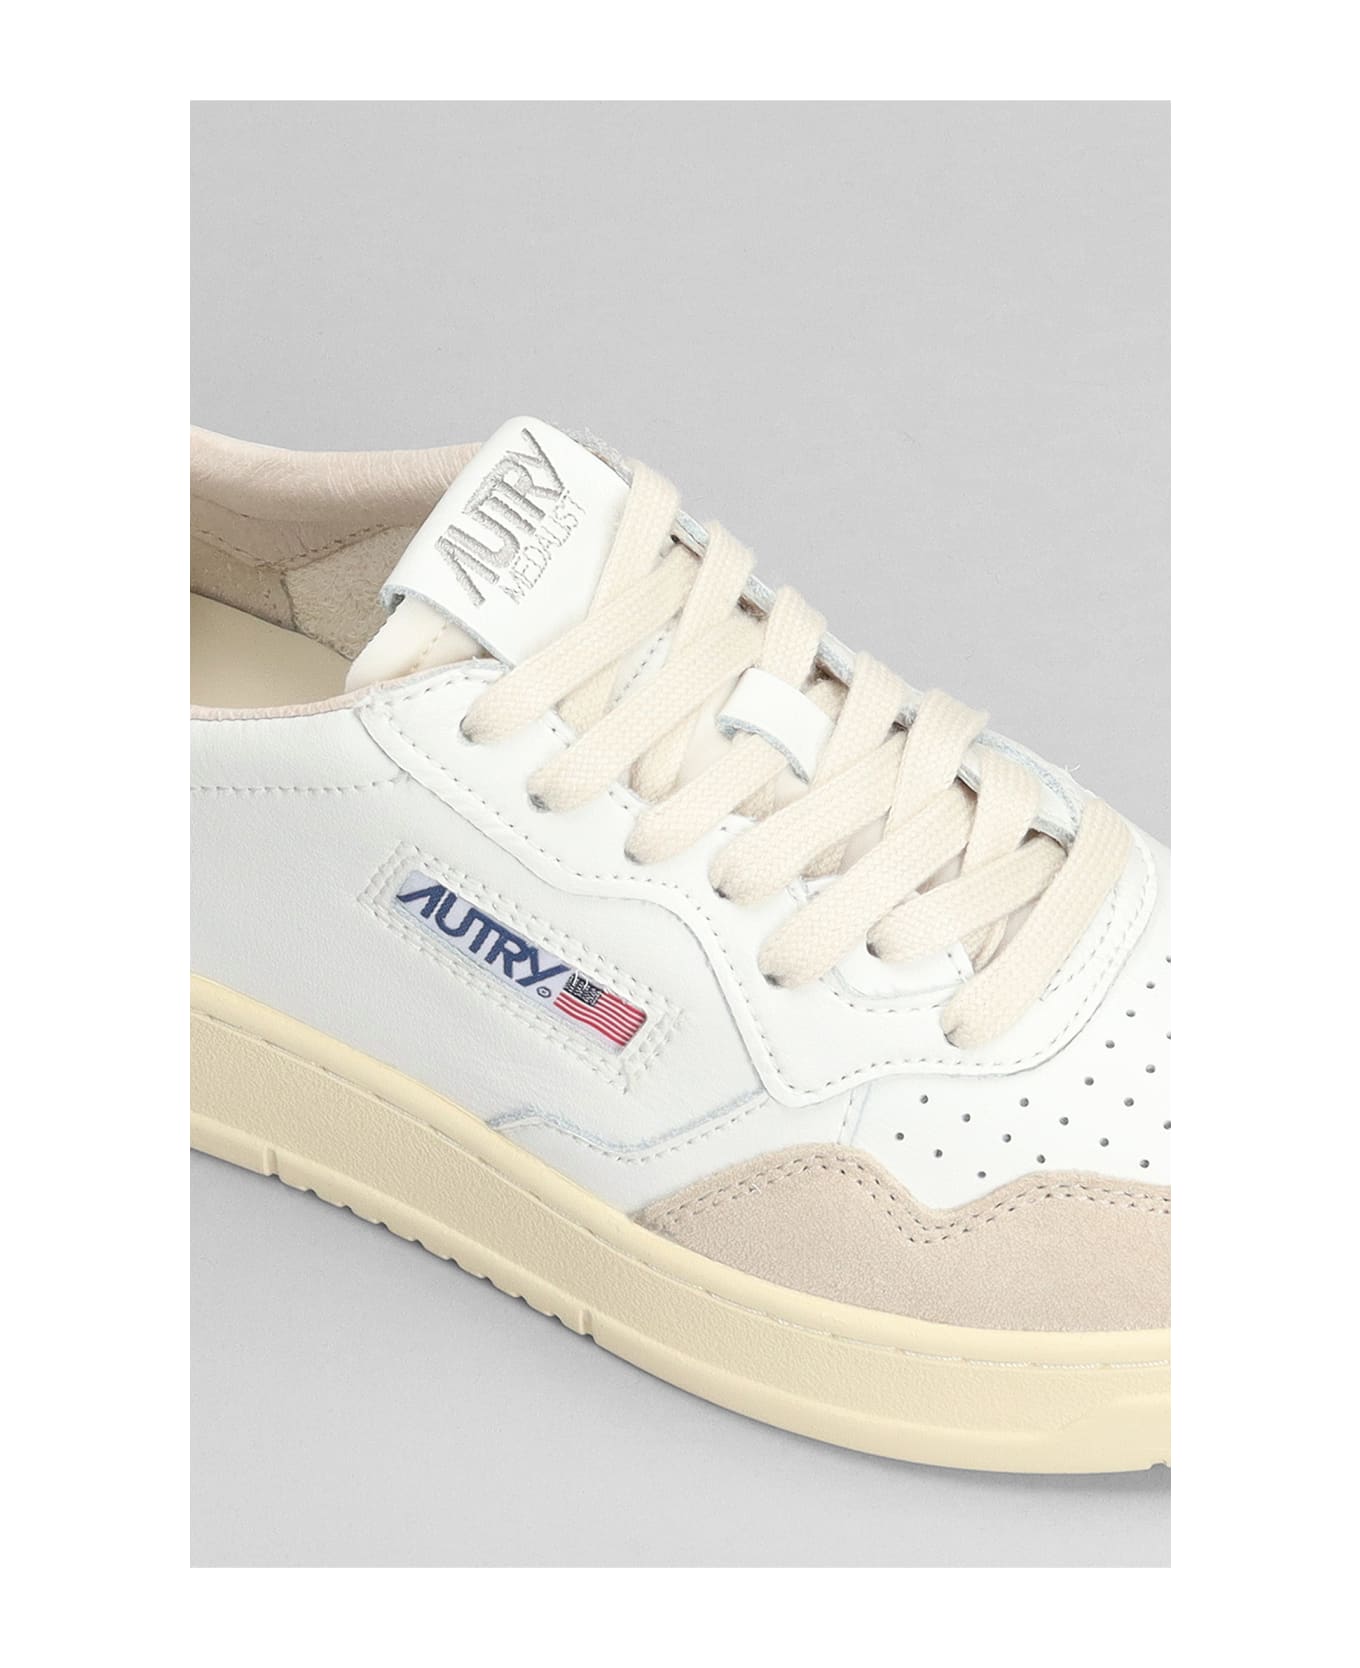 Autry Medalist Low Sneakers - WHITE/yellow